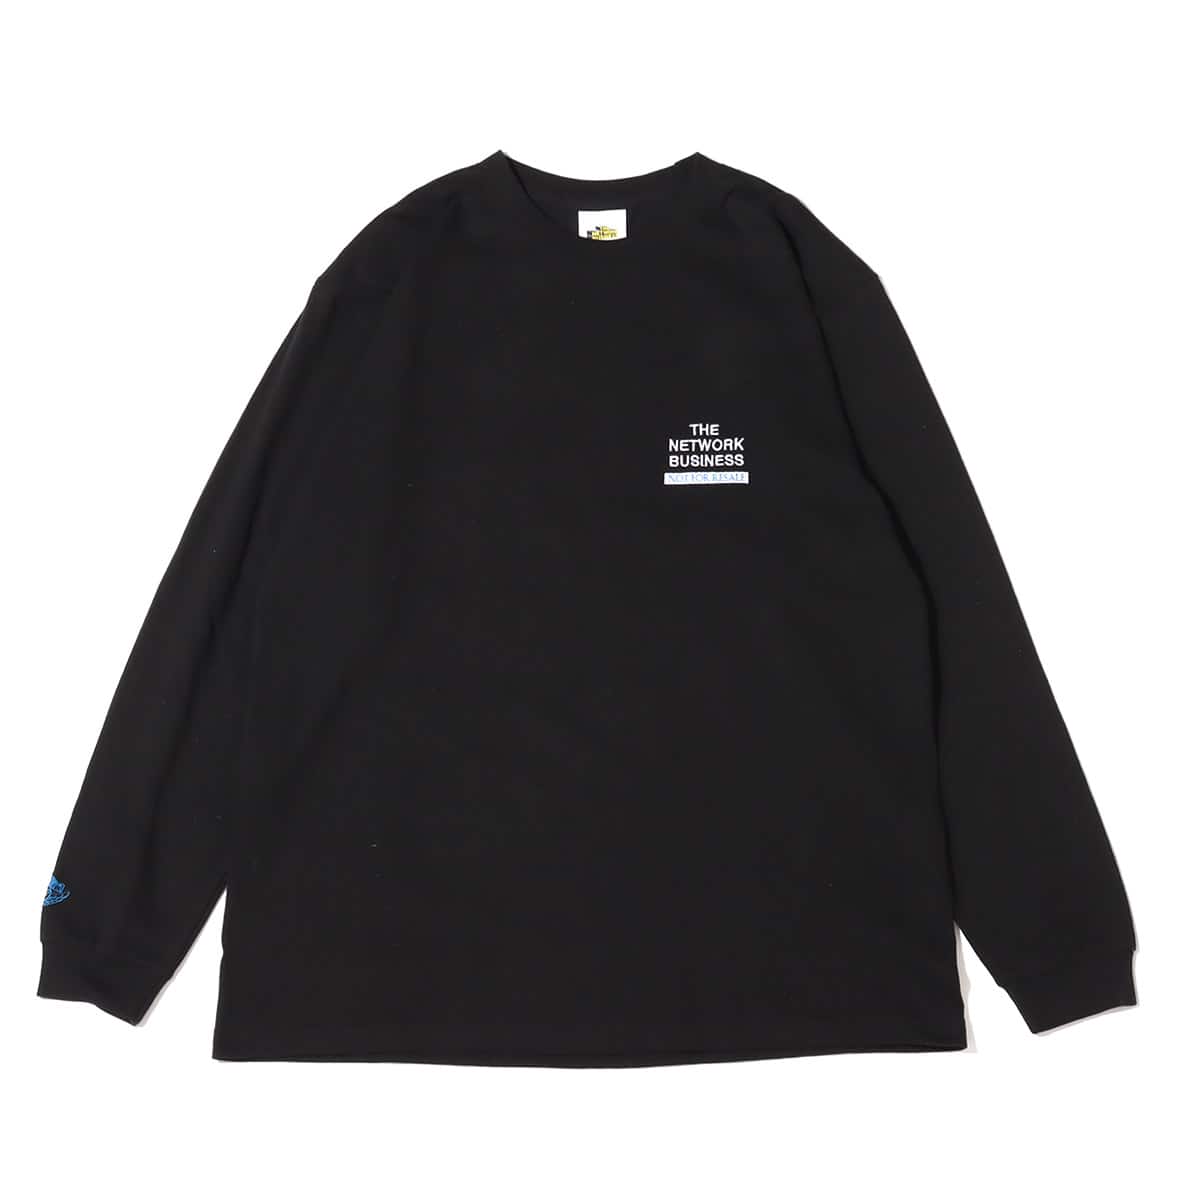 THE NETWORK BUSINESS × ANTHONY 9 GRAPHICS L/S T-SHIRT BLACK 21FA-I